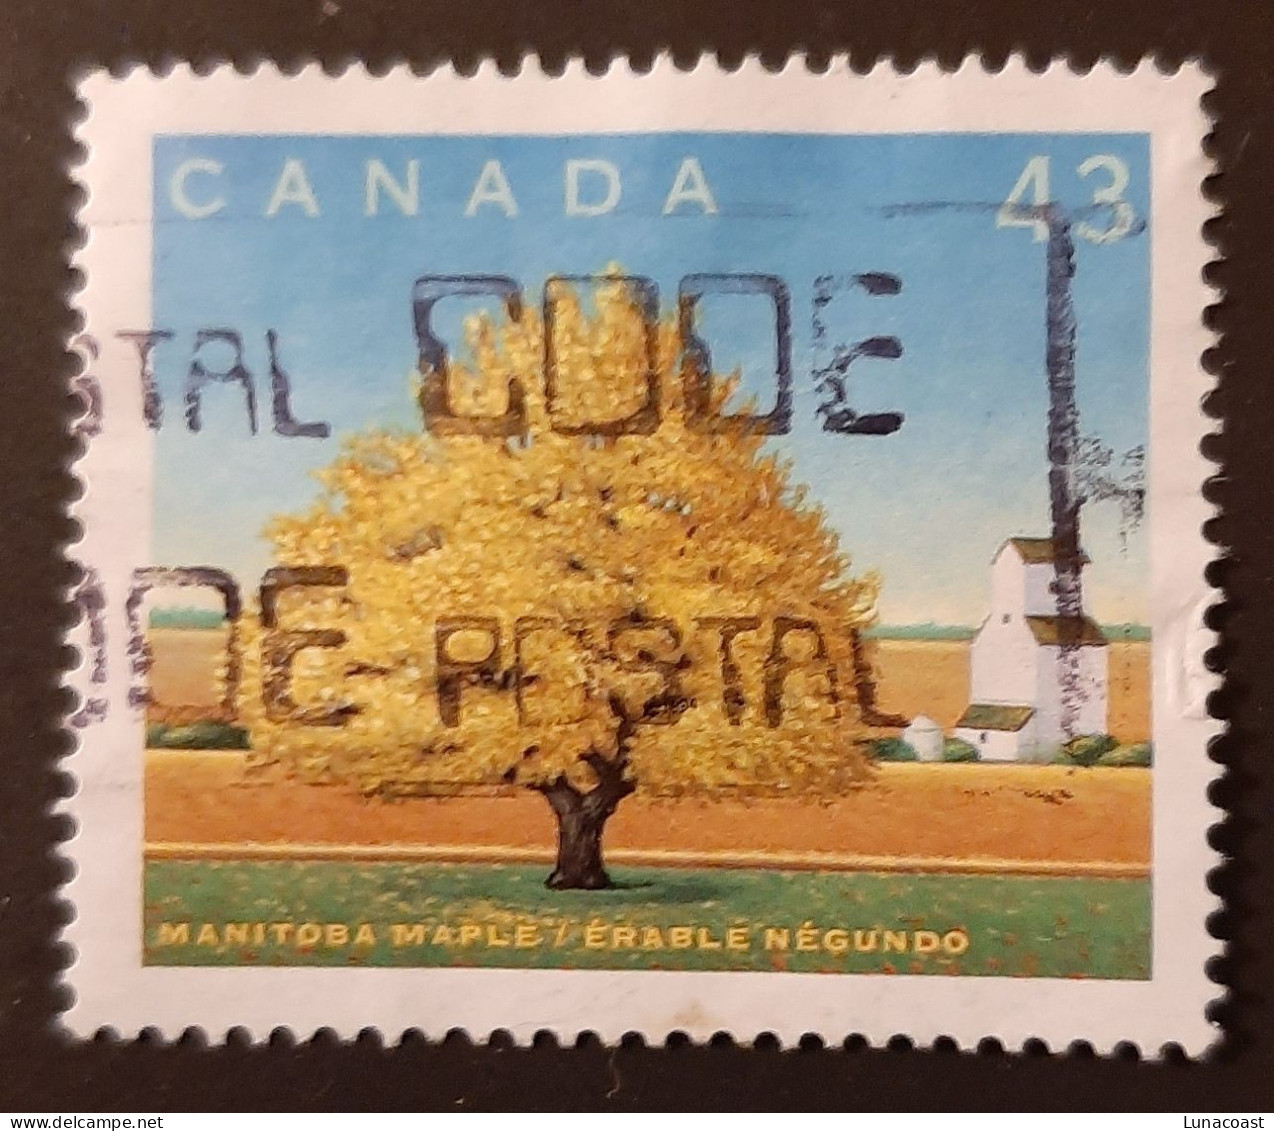 Canada 1994  USED  Sc1524 F   43c Manitoba Maple - Used Stamps